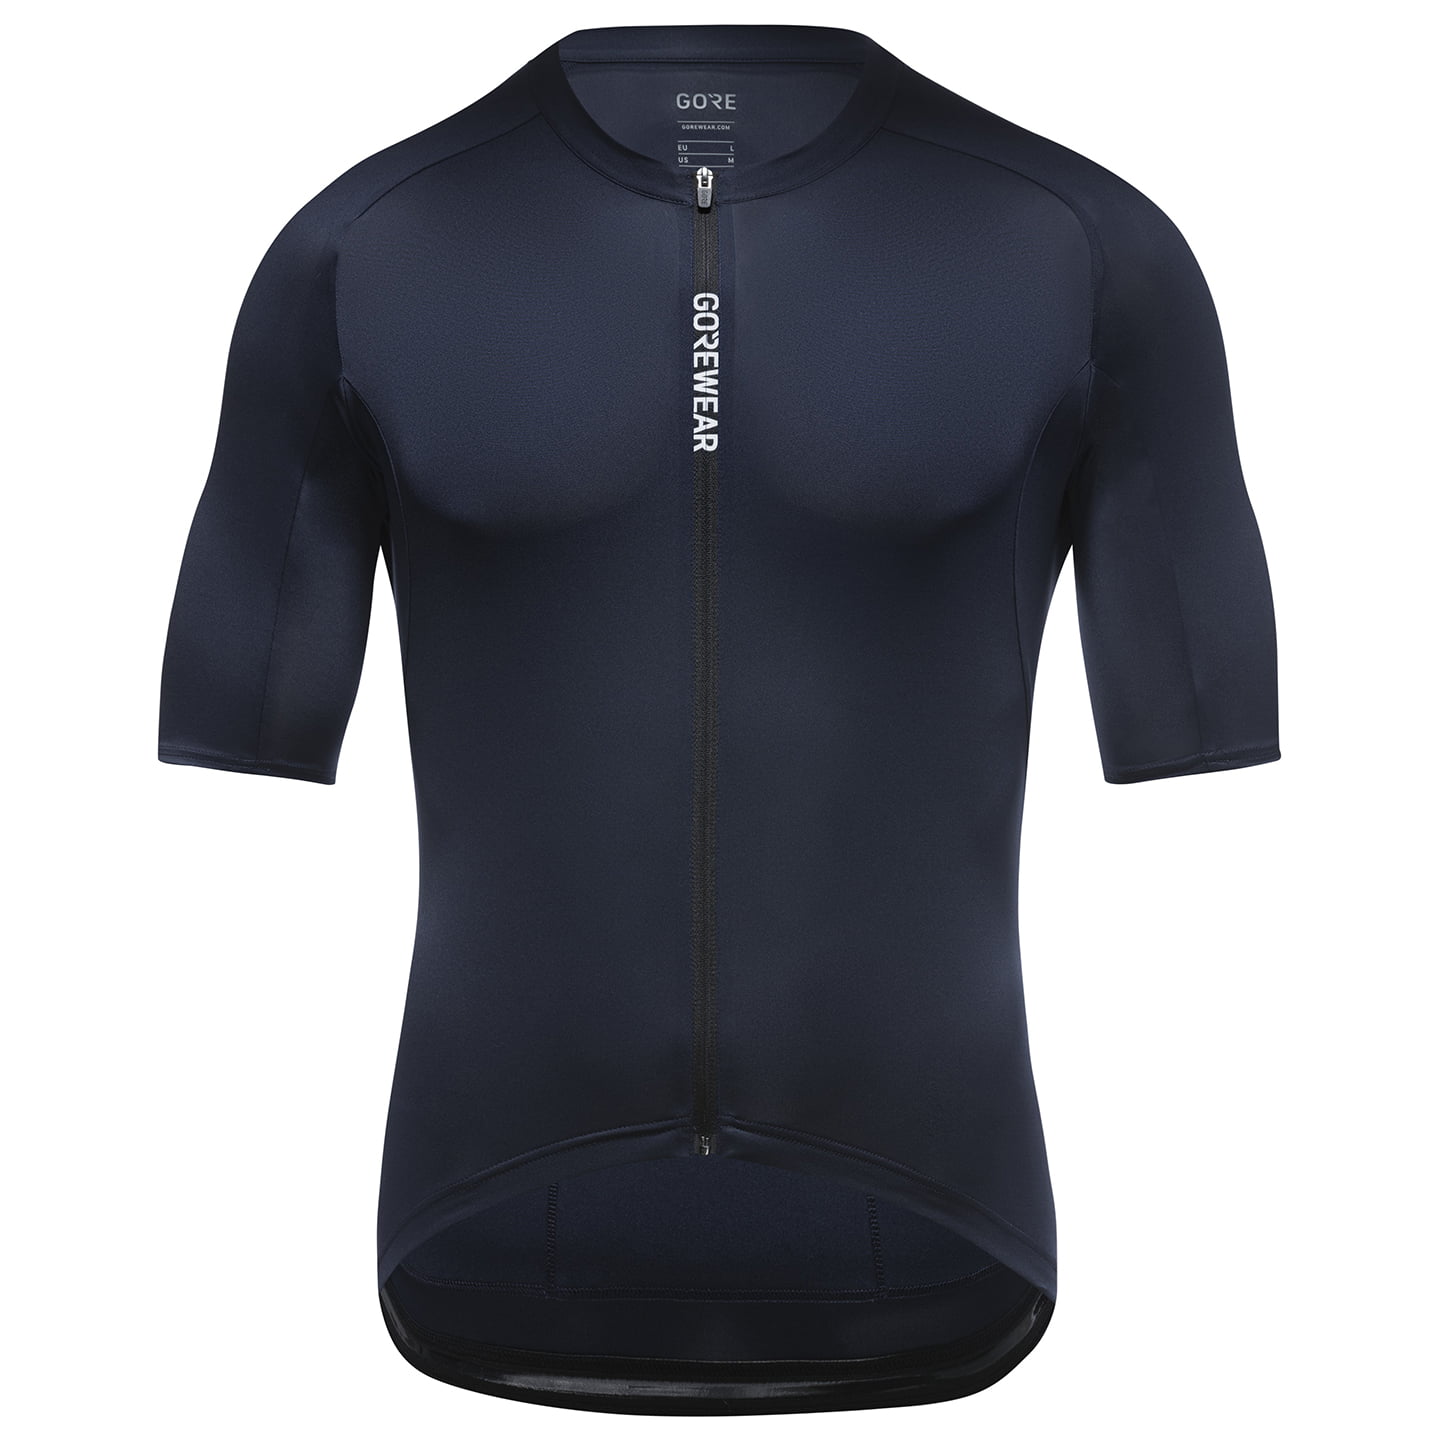 Spinshift Short Sleeve Jersey Short Sleeve Jersey, for men, size XL, Cycling jersey, Cycle clothing